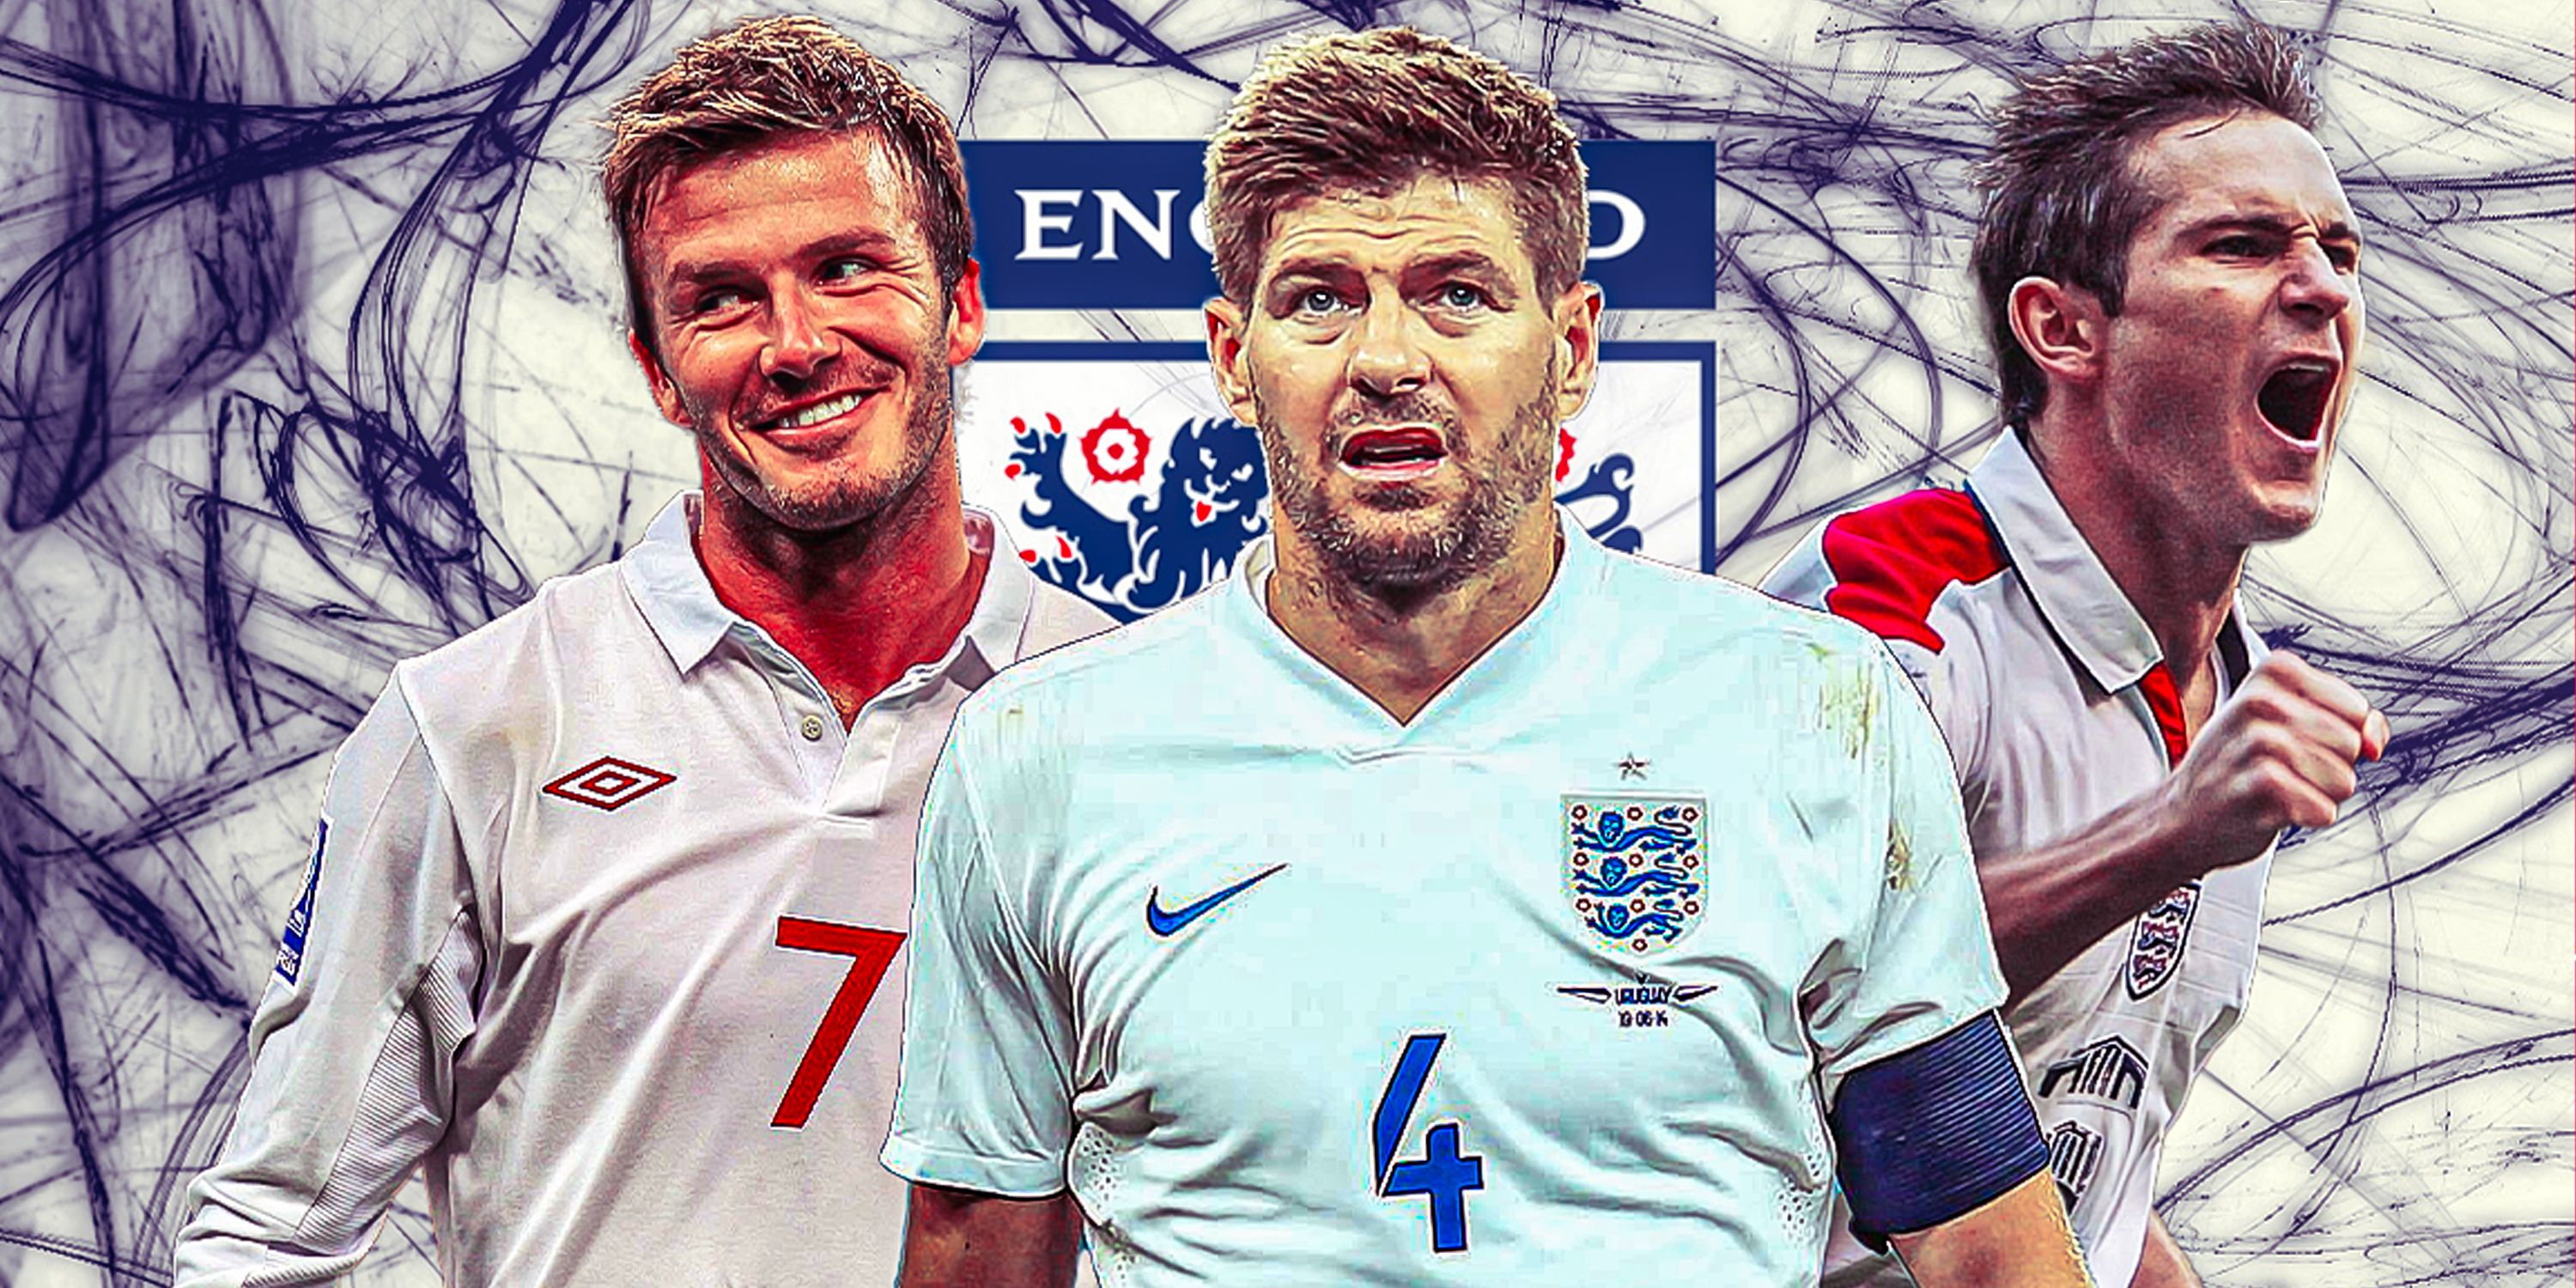 Steven Gerrard, Frank Lampard and David Beckham in England kit with England logo/theme